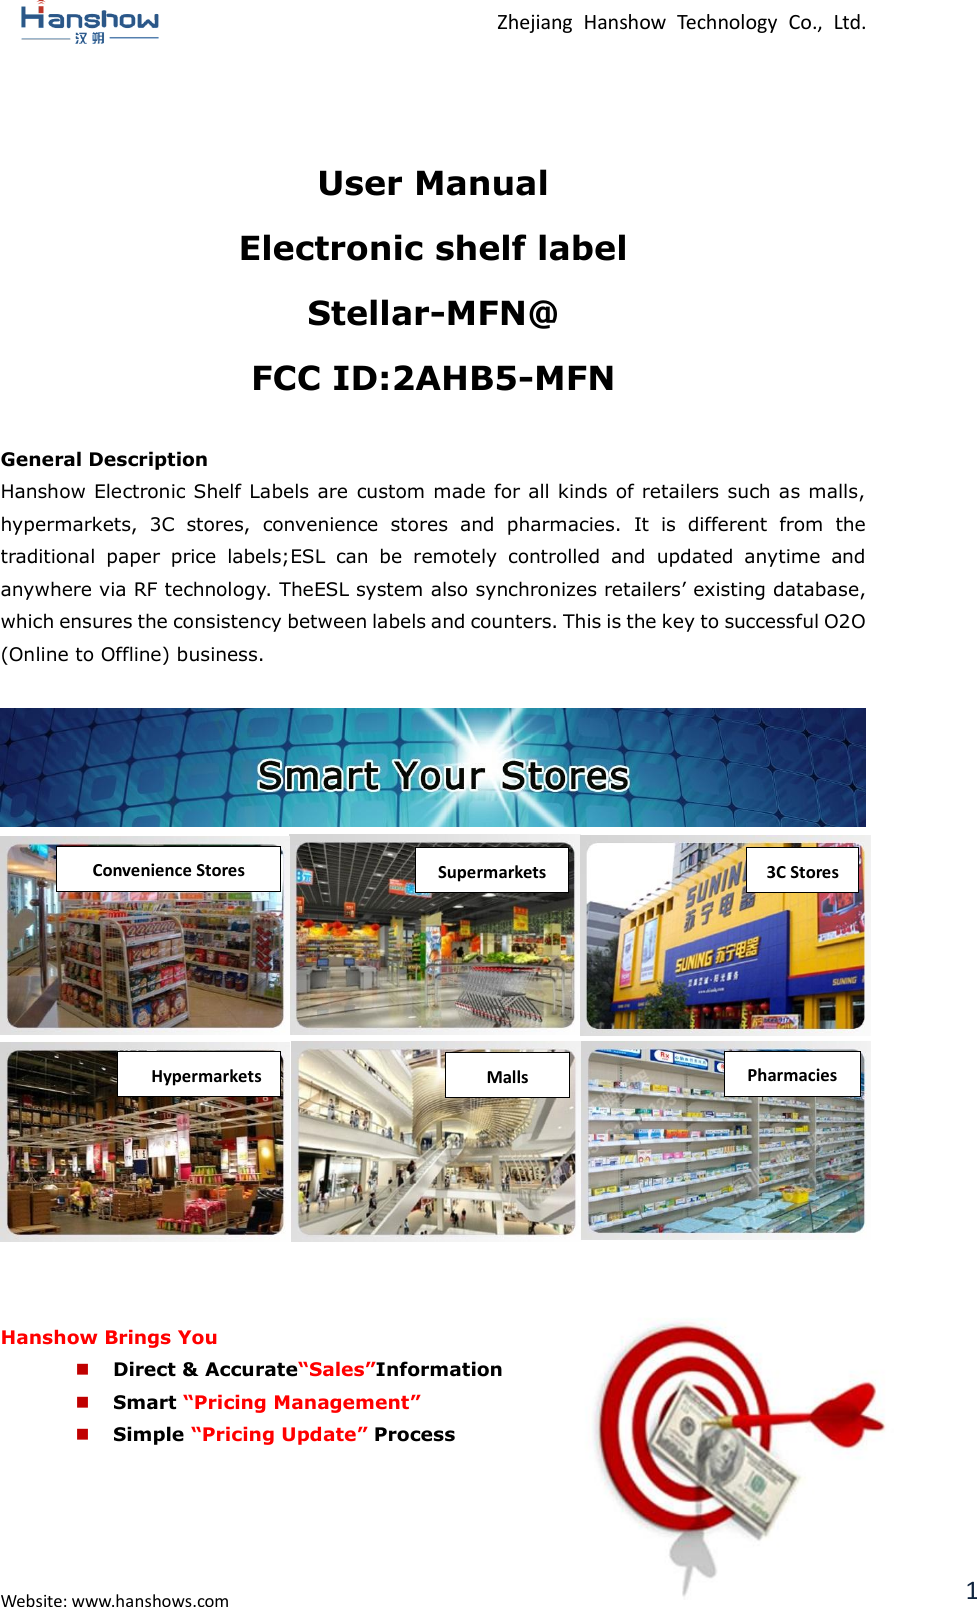  Zhejiang  Hanshow  Technology  Co.,  Ltd.   Website: www.hanshows.com 1  User Manual Electronic shelf label Stellar-MFN@ FCC ID:2AHB5-MFN  General Description Hanshow Electronic Shelf Labels  are custom made for all kinds of retailers such as malls, hypermarkets,  3C  stores,  convenience  stores  and  pharmacies.  It  is  different  from  the traditional  paper  price  labels;ESL  can  be  remotely  controlled  and  updated  anytime  and anywhere via RF technology. TheESL system also synchronizes retailers’ existing database, which ensures the consistency between labels and counters. This is the key to successful O2O (Online to Offline) business.                    Hanshow Brings You  Direct &amp; Accurate“Sales”Information  Smart “Pricing Management”  Simple “Pricing Update” Process    Convenience Stores Supermarkets 3C Stores Pharmacies Malls Hypermarkets G-MALL 